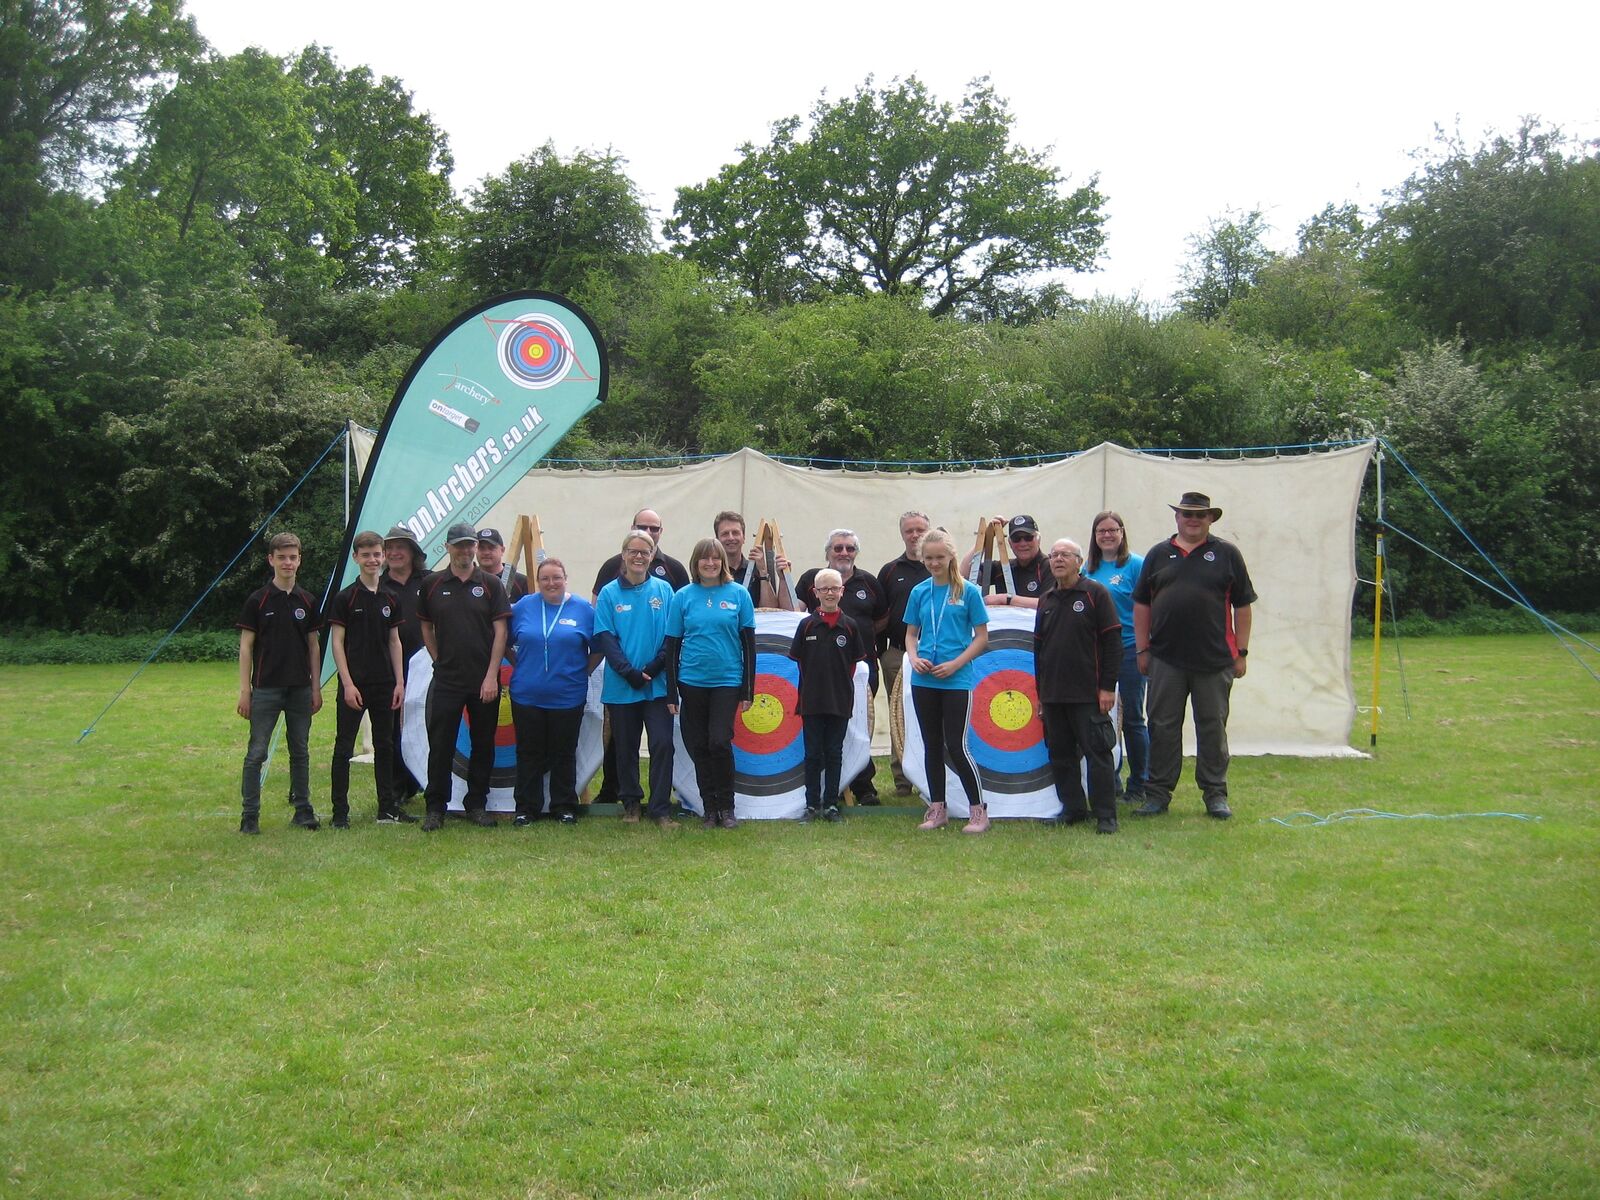 Participants at a previous Archery GB Big Weekend event